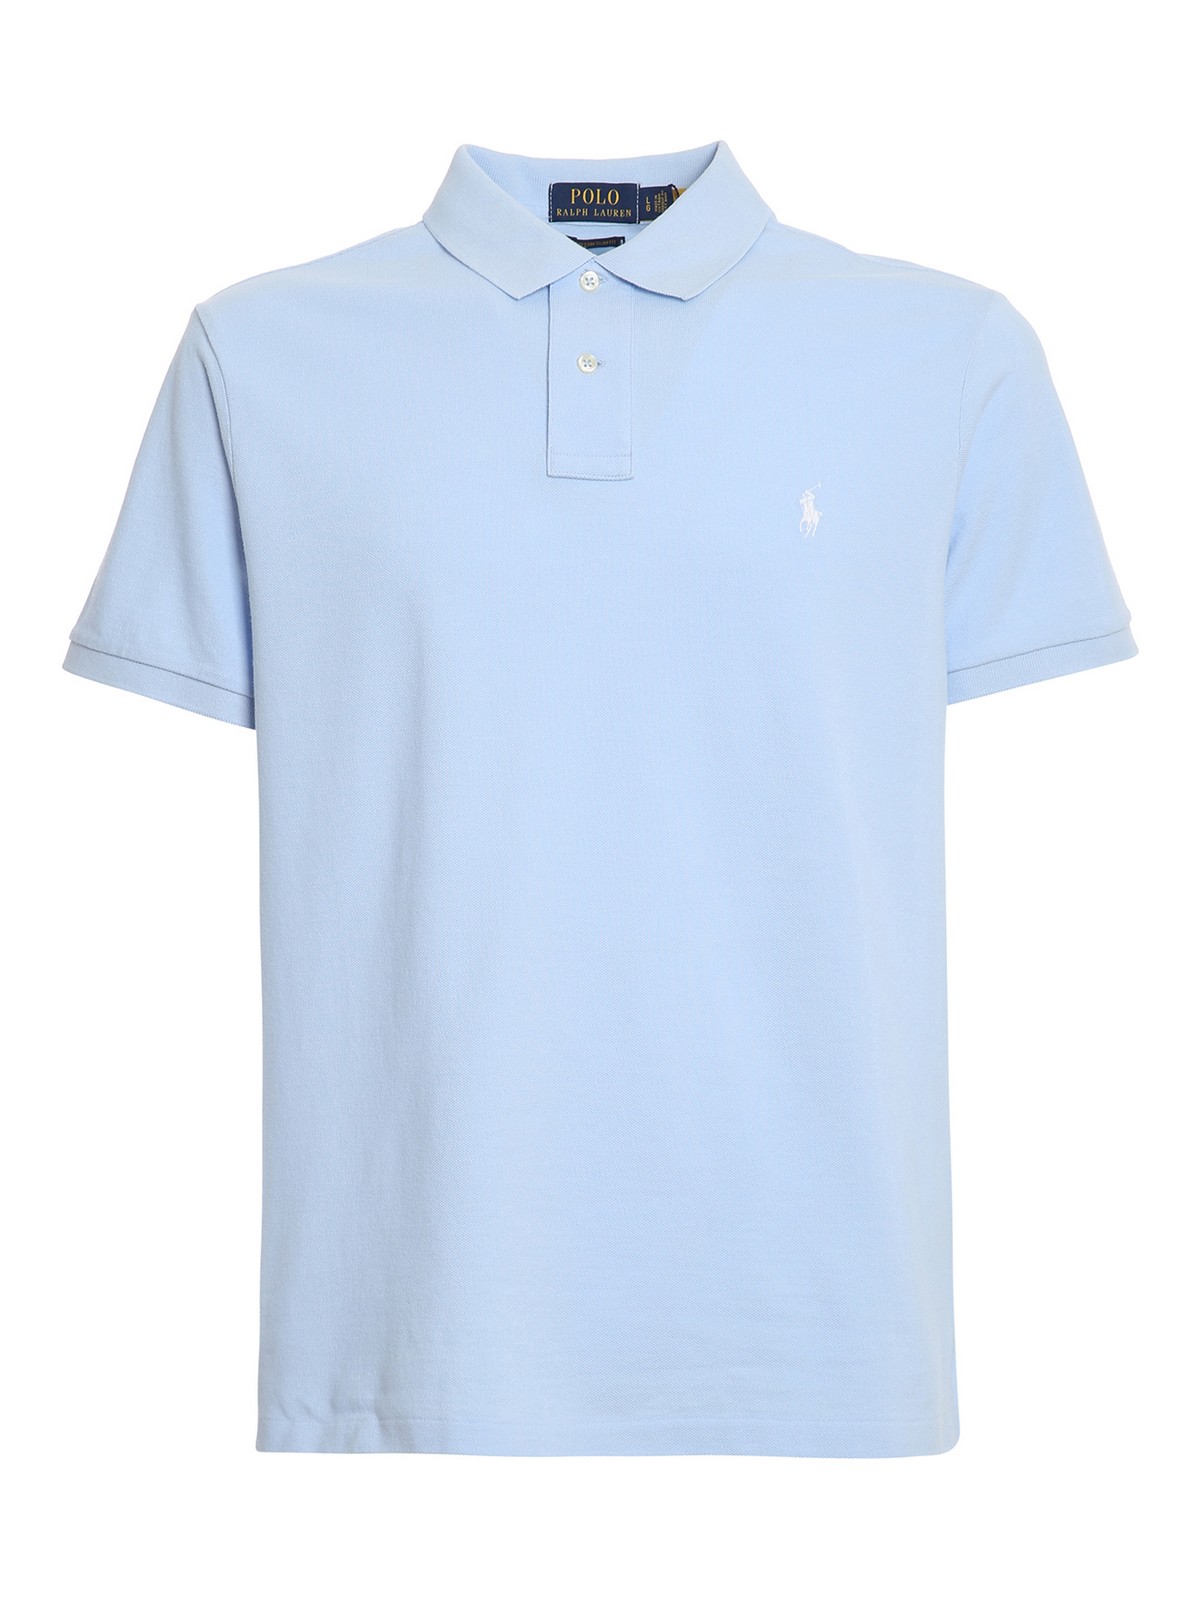 Polo Ralph Lauren Embroidered Cotton Polo Shirt In Light Blue